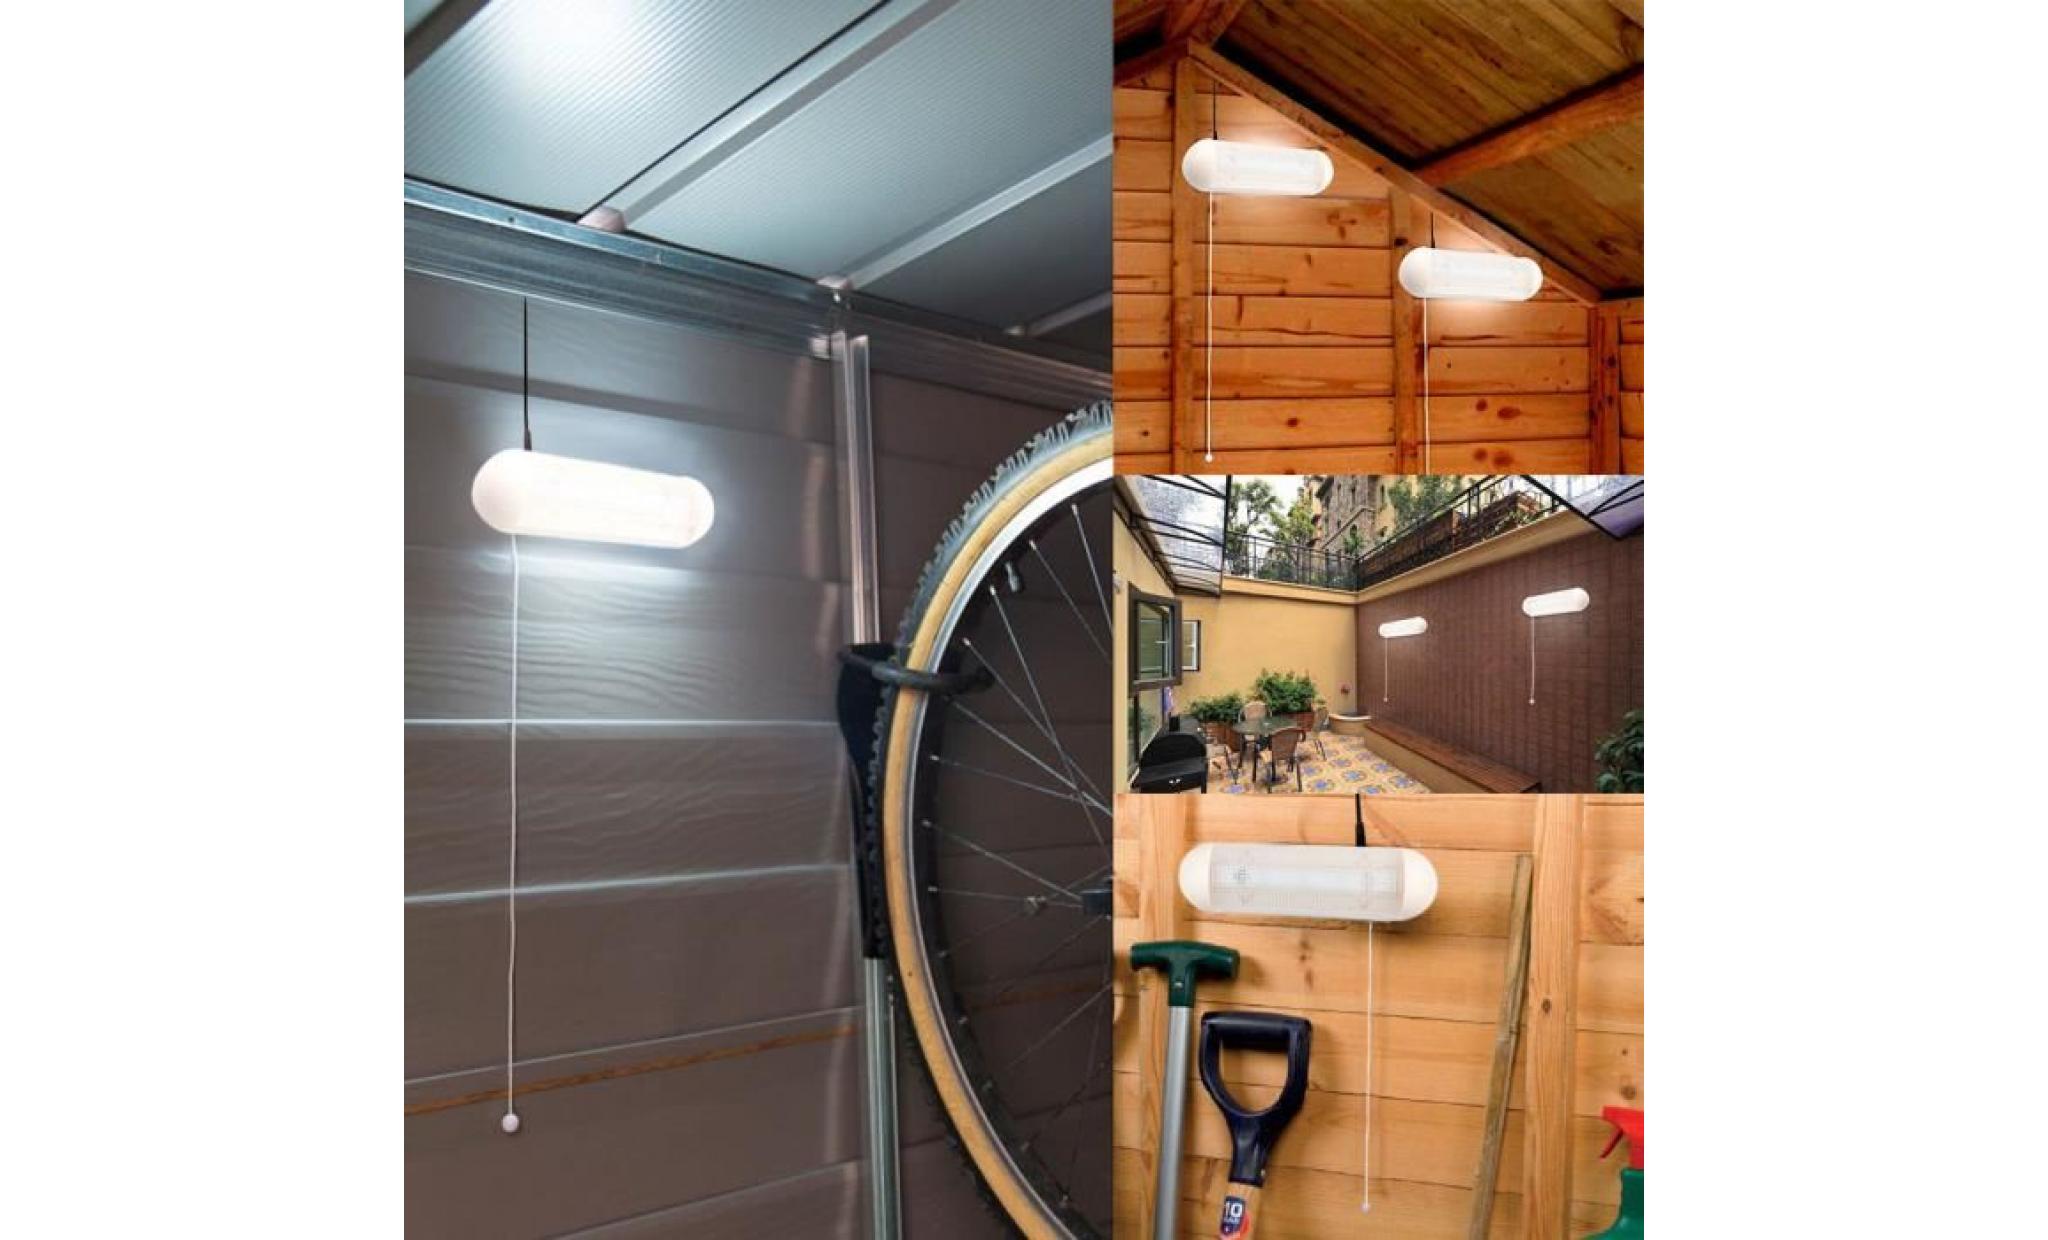 2pc 10led solar power jardin shed garage stable light rechargeable twin pas cher